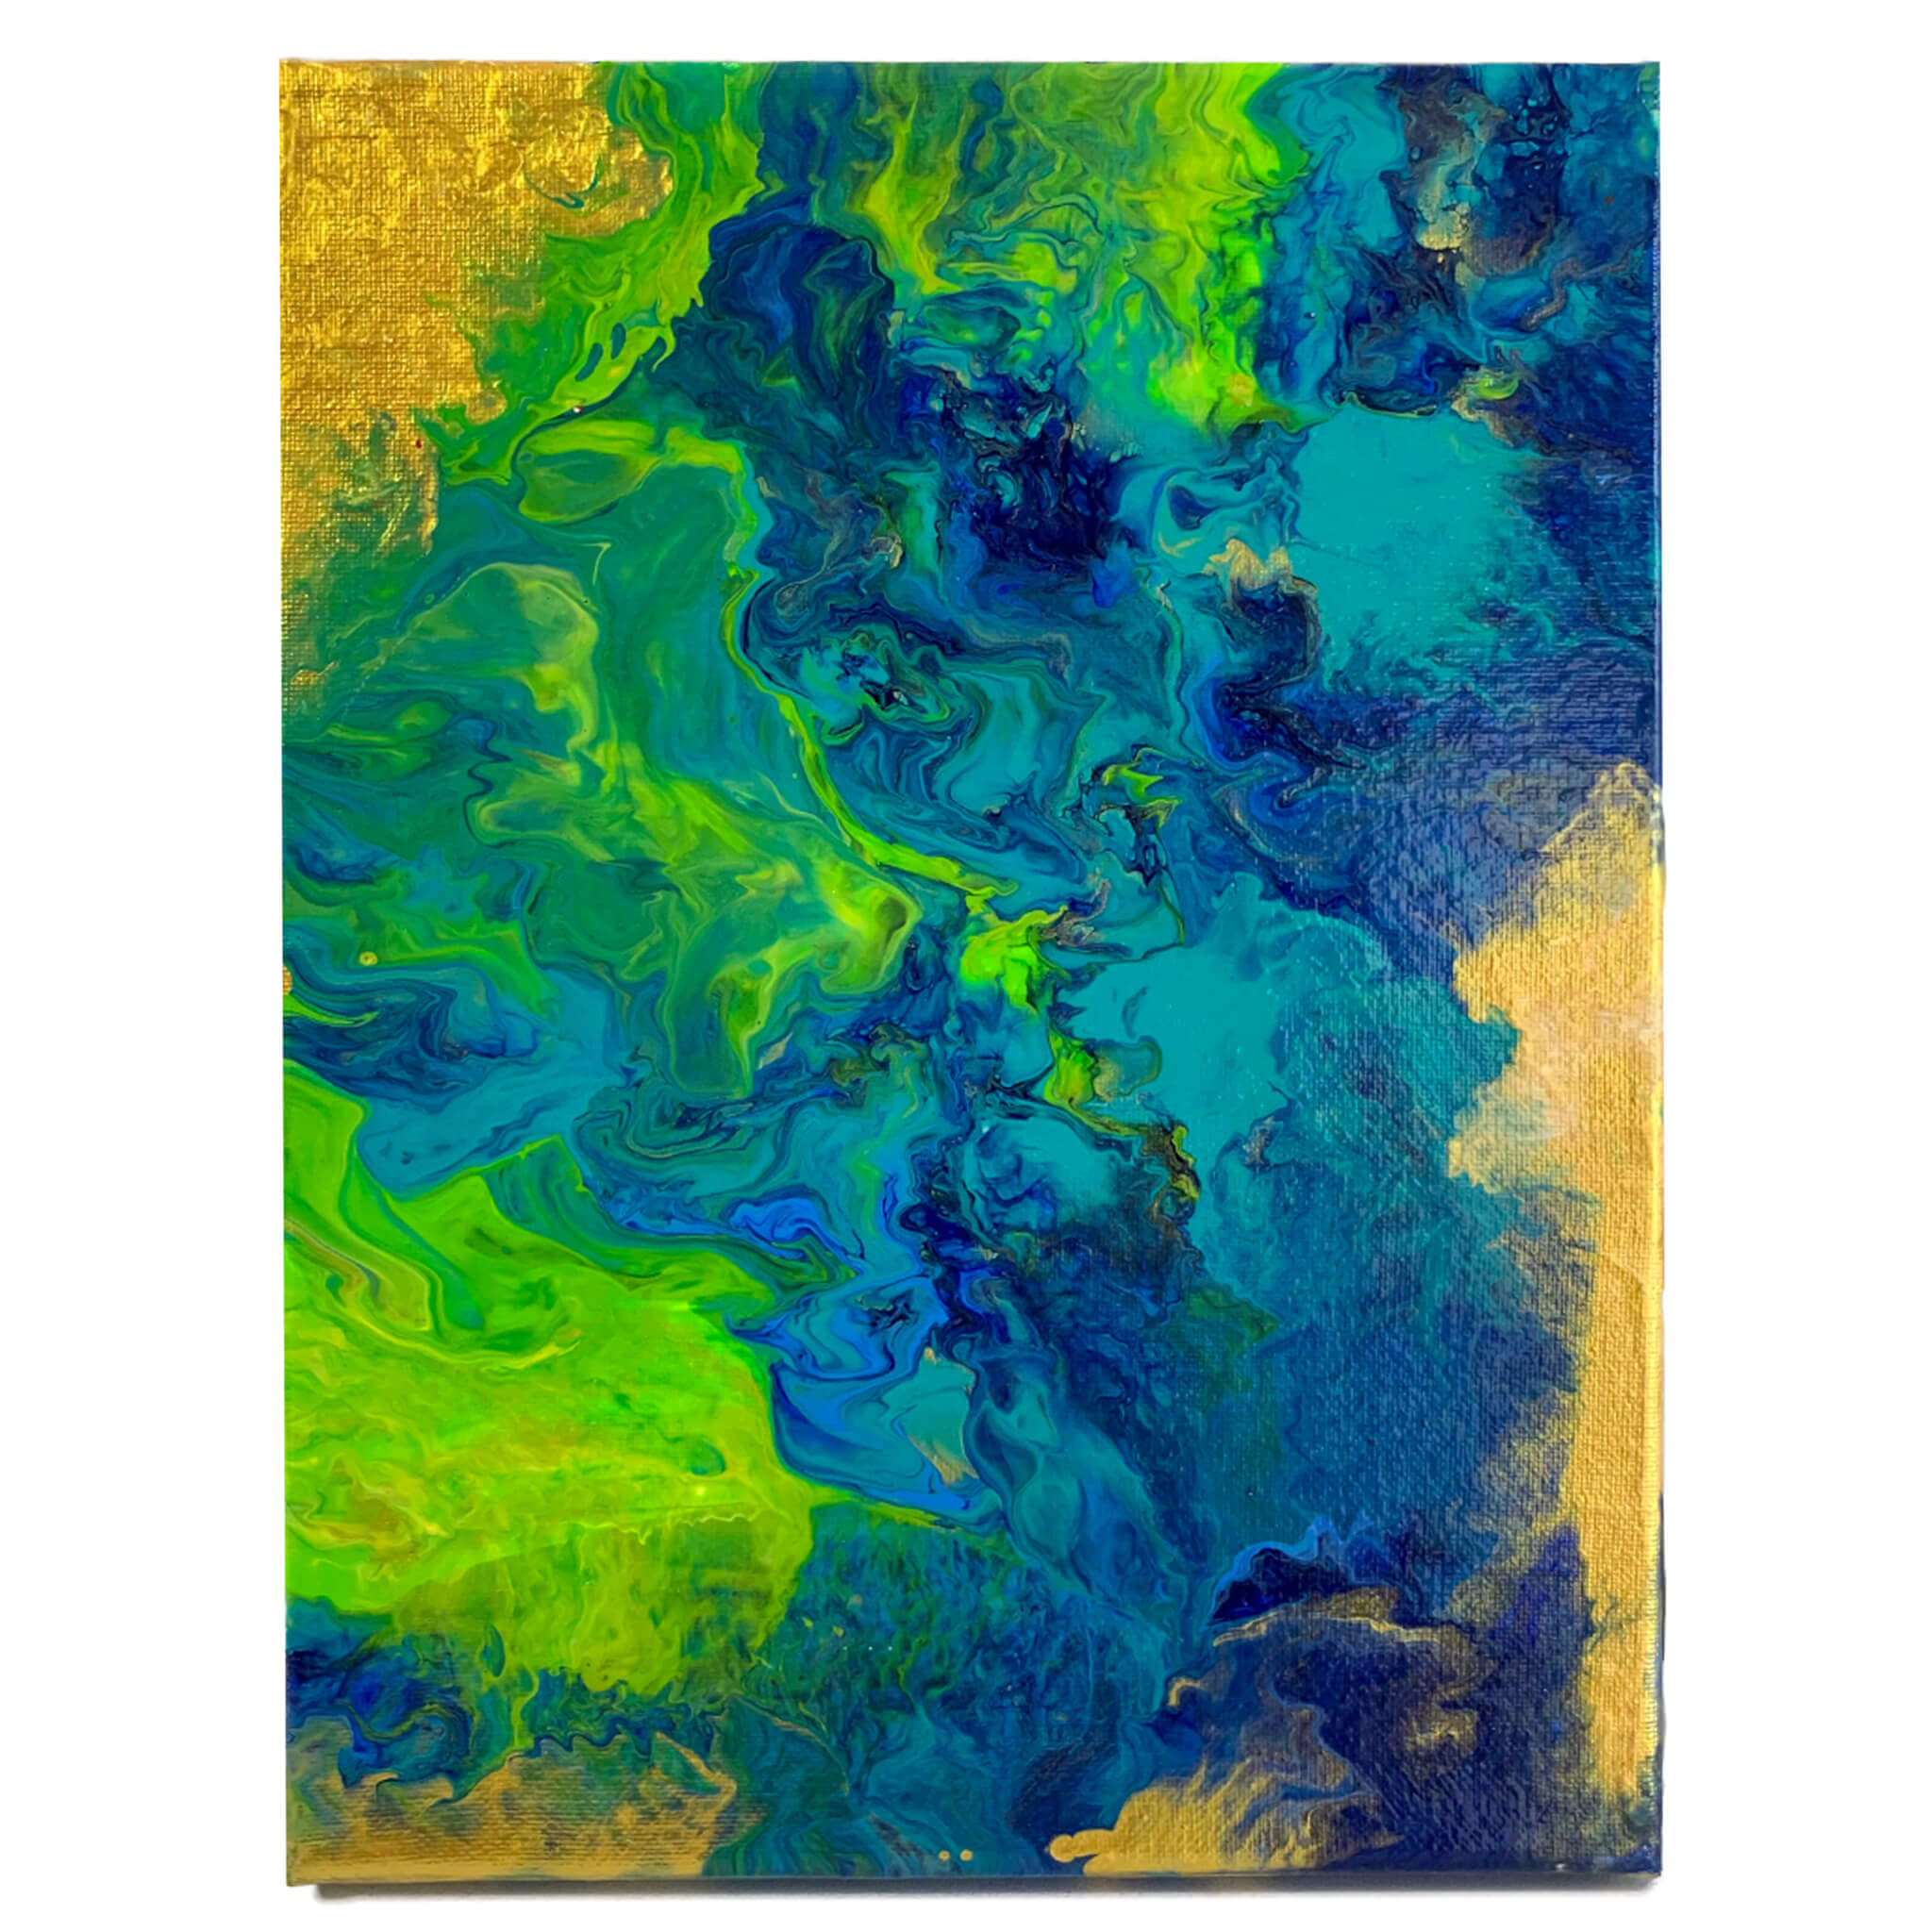 'A Dream'-9x12 in. Abstract Acrylic Pour Painting